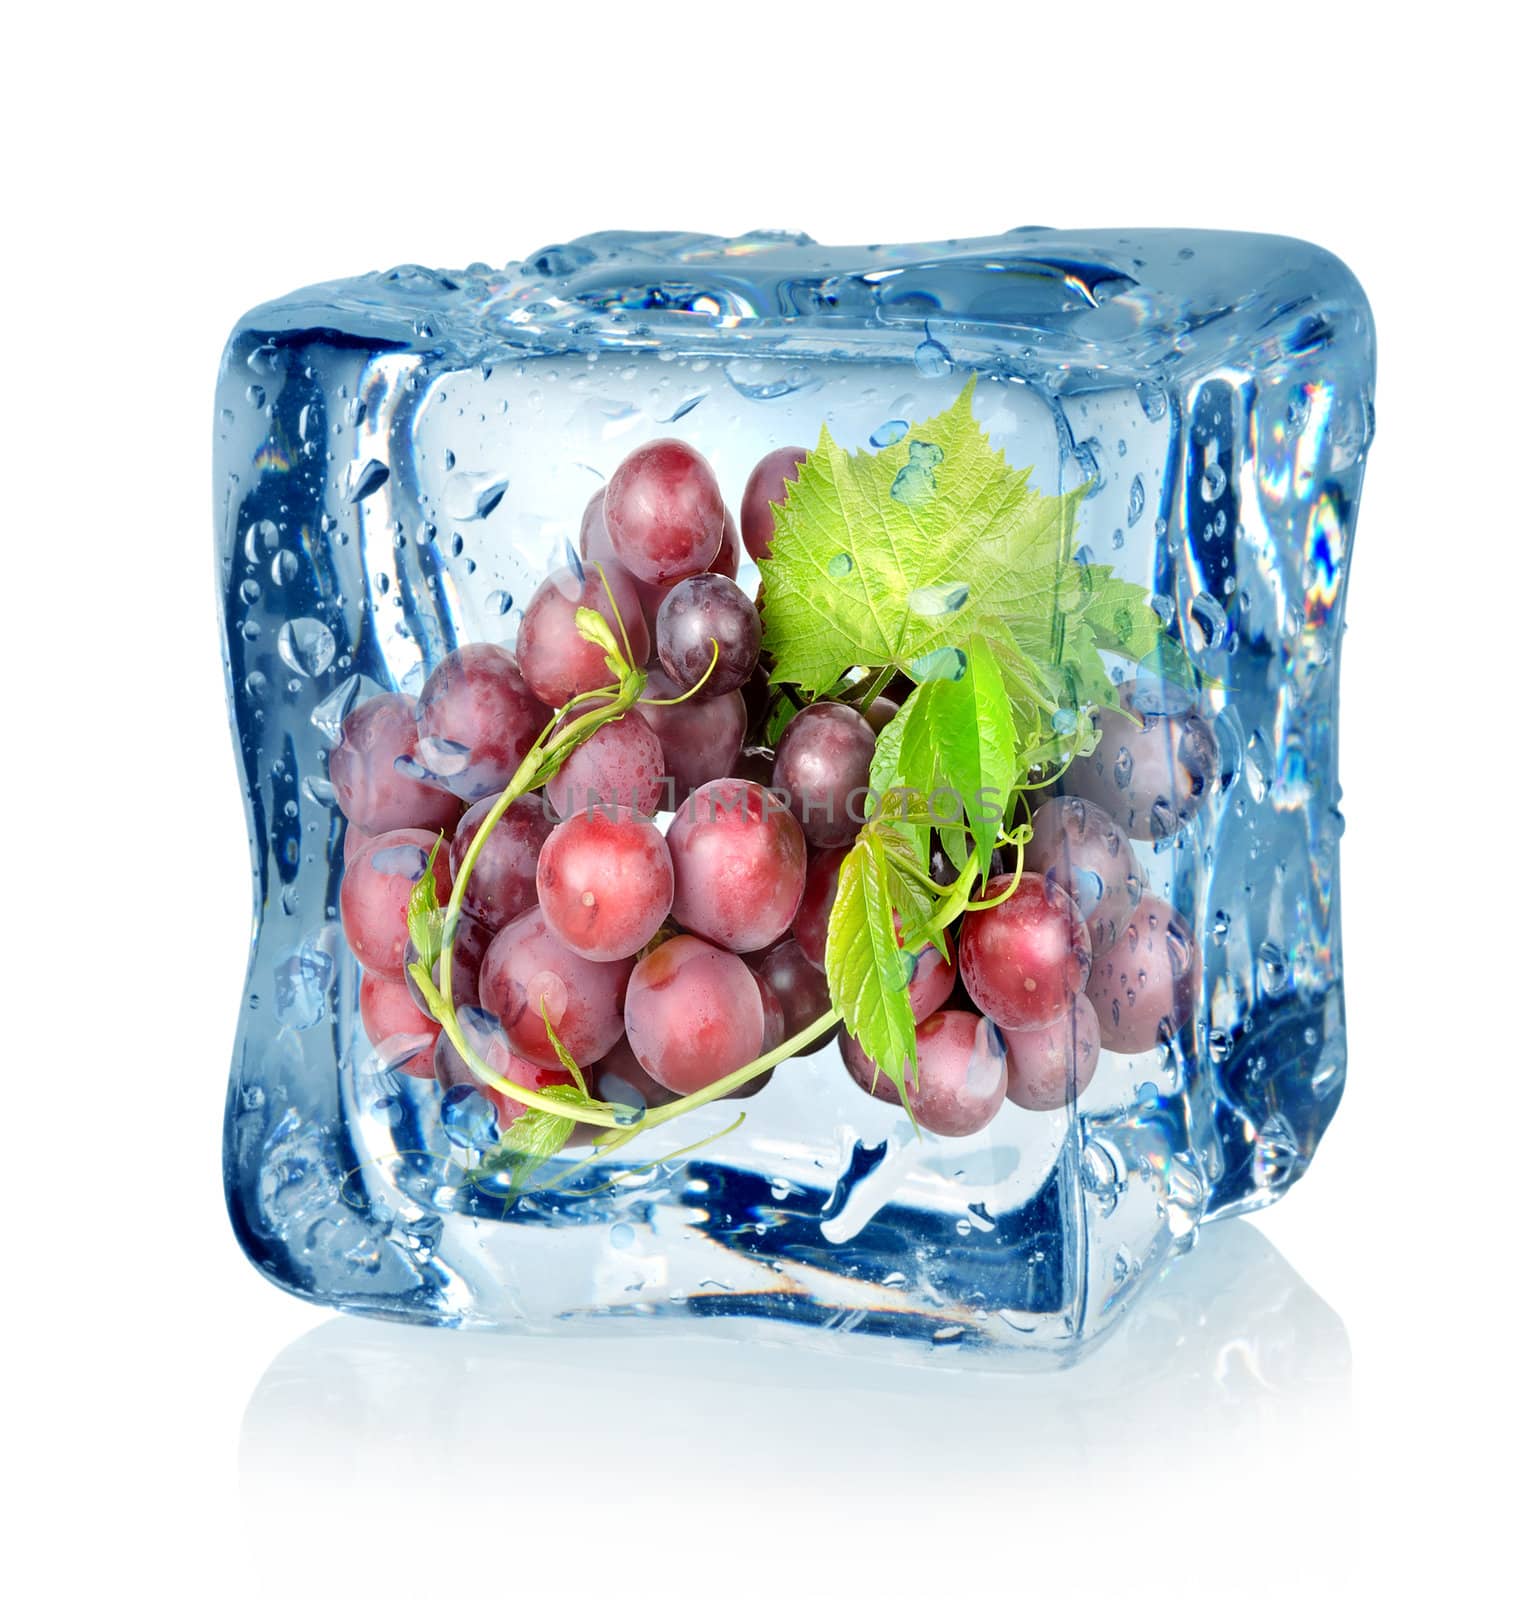 Ice cube and blue grapes by Givaga